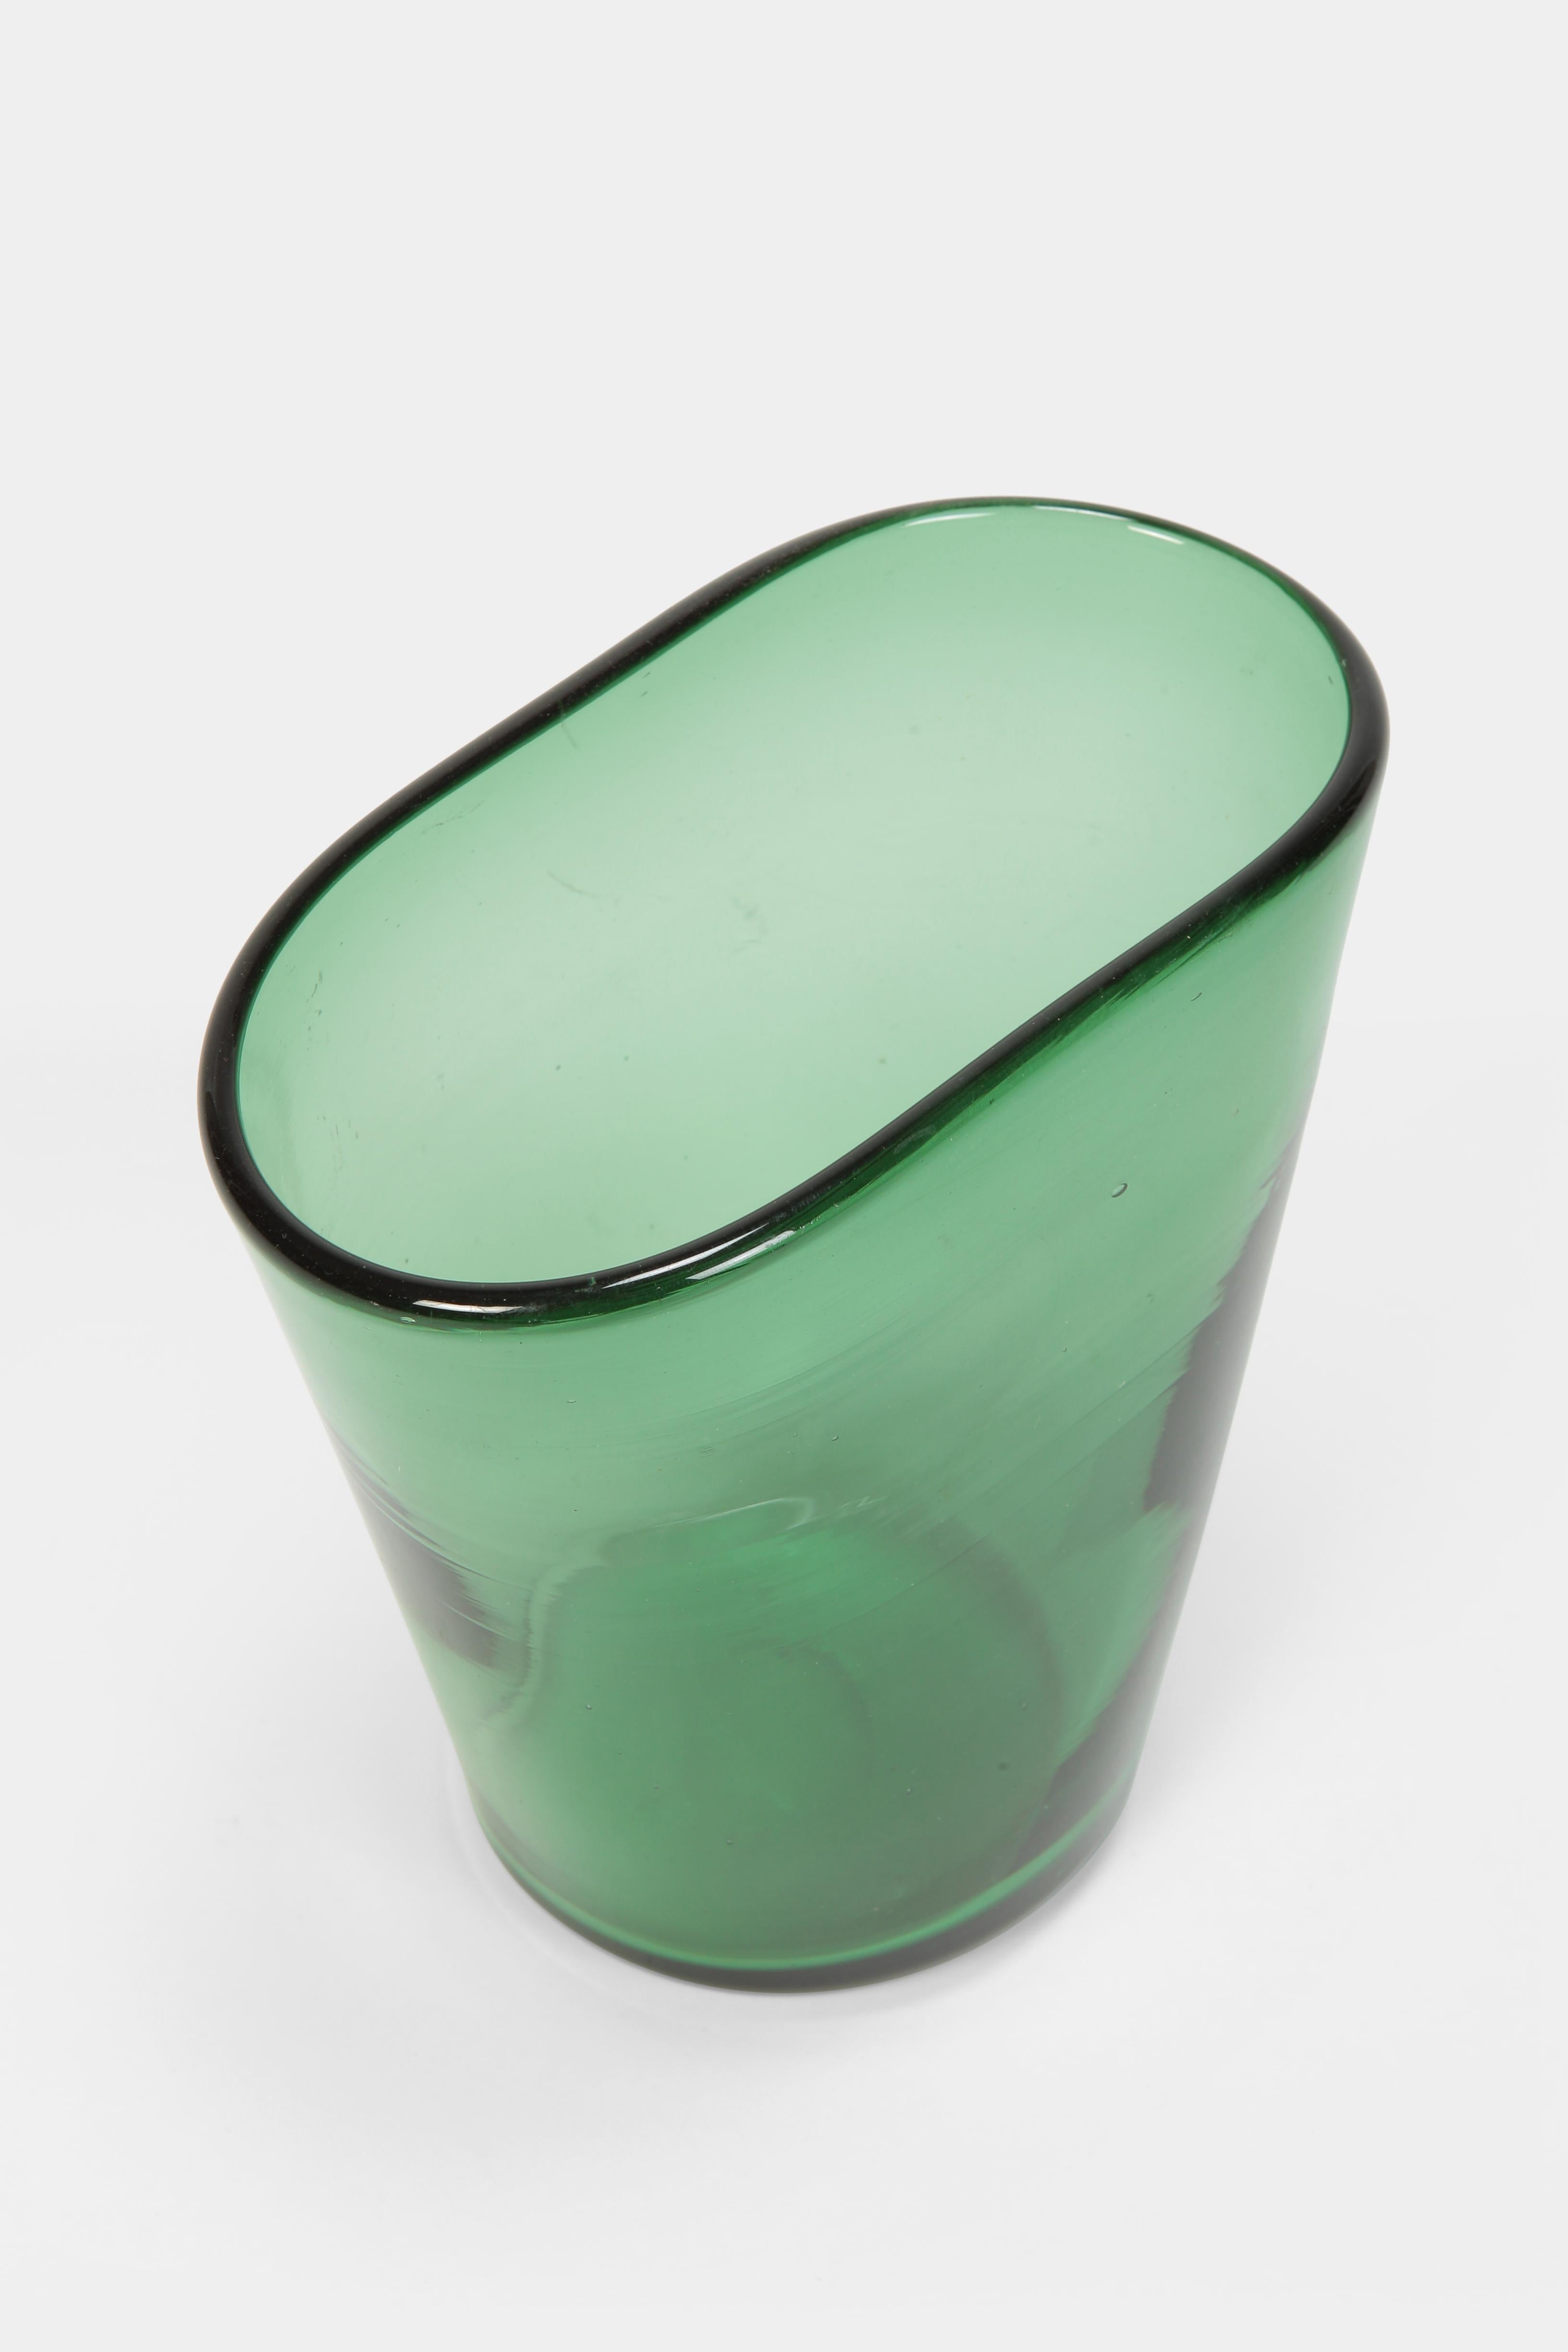 Vase manufactured by Vetro Verde di Empoli in the 1960s in Italy. Thick-walled vase out of luminous green glass with an oval opening.